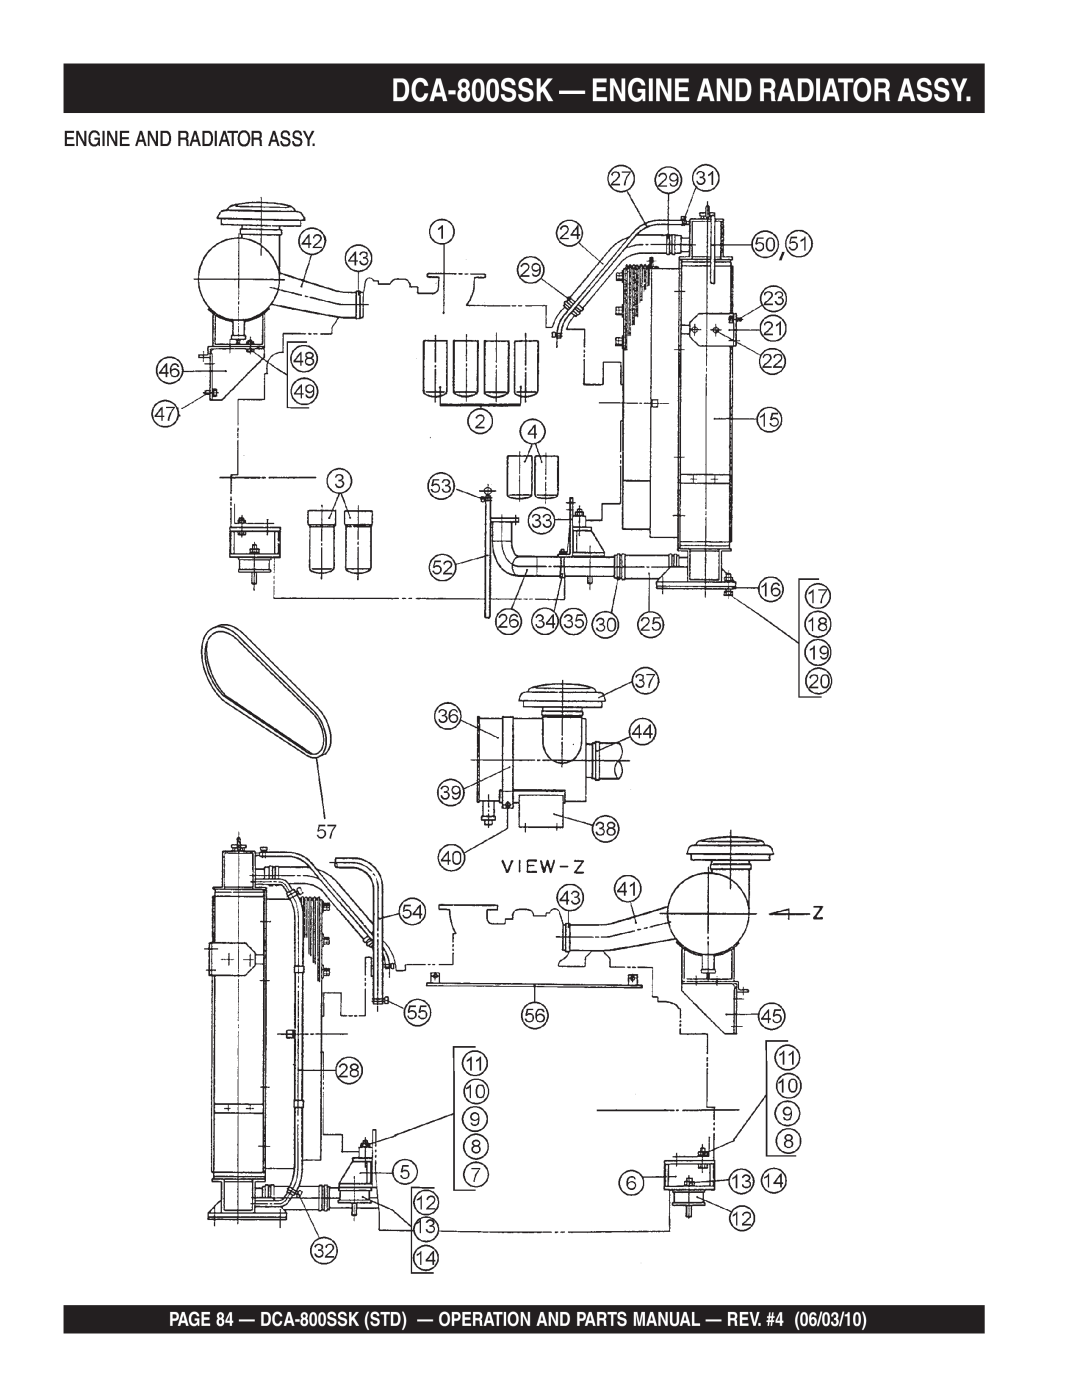 Multiquip operation manual DCA-800SSK - ENGINE AND RADIATOR ASSY 